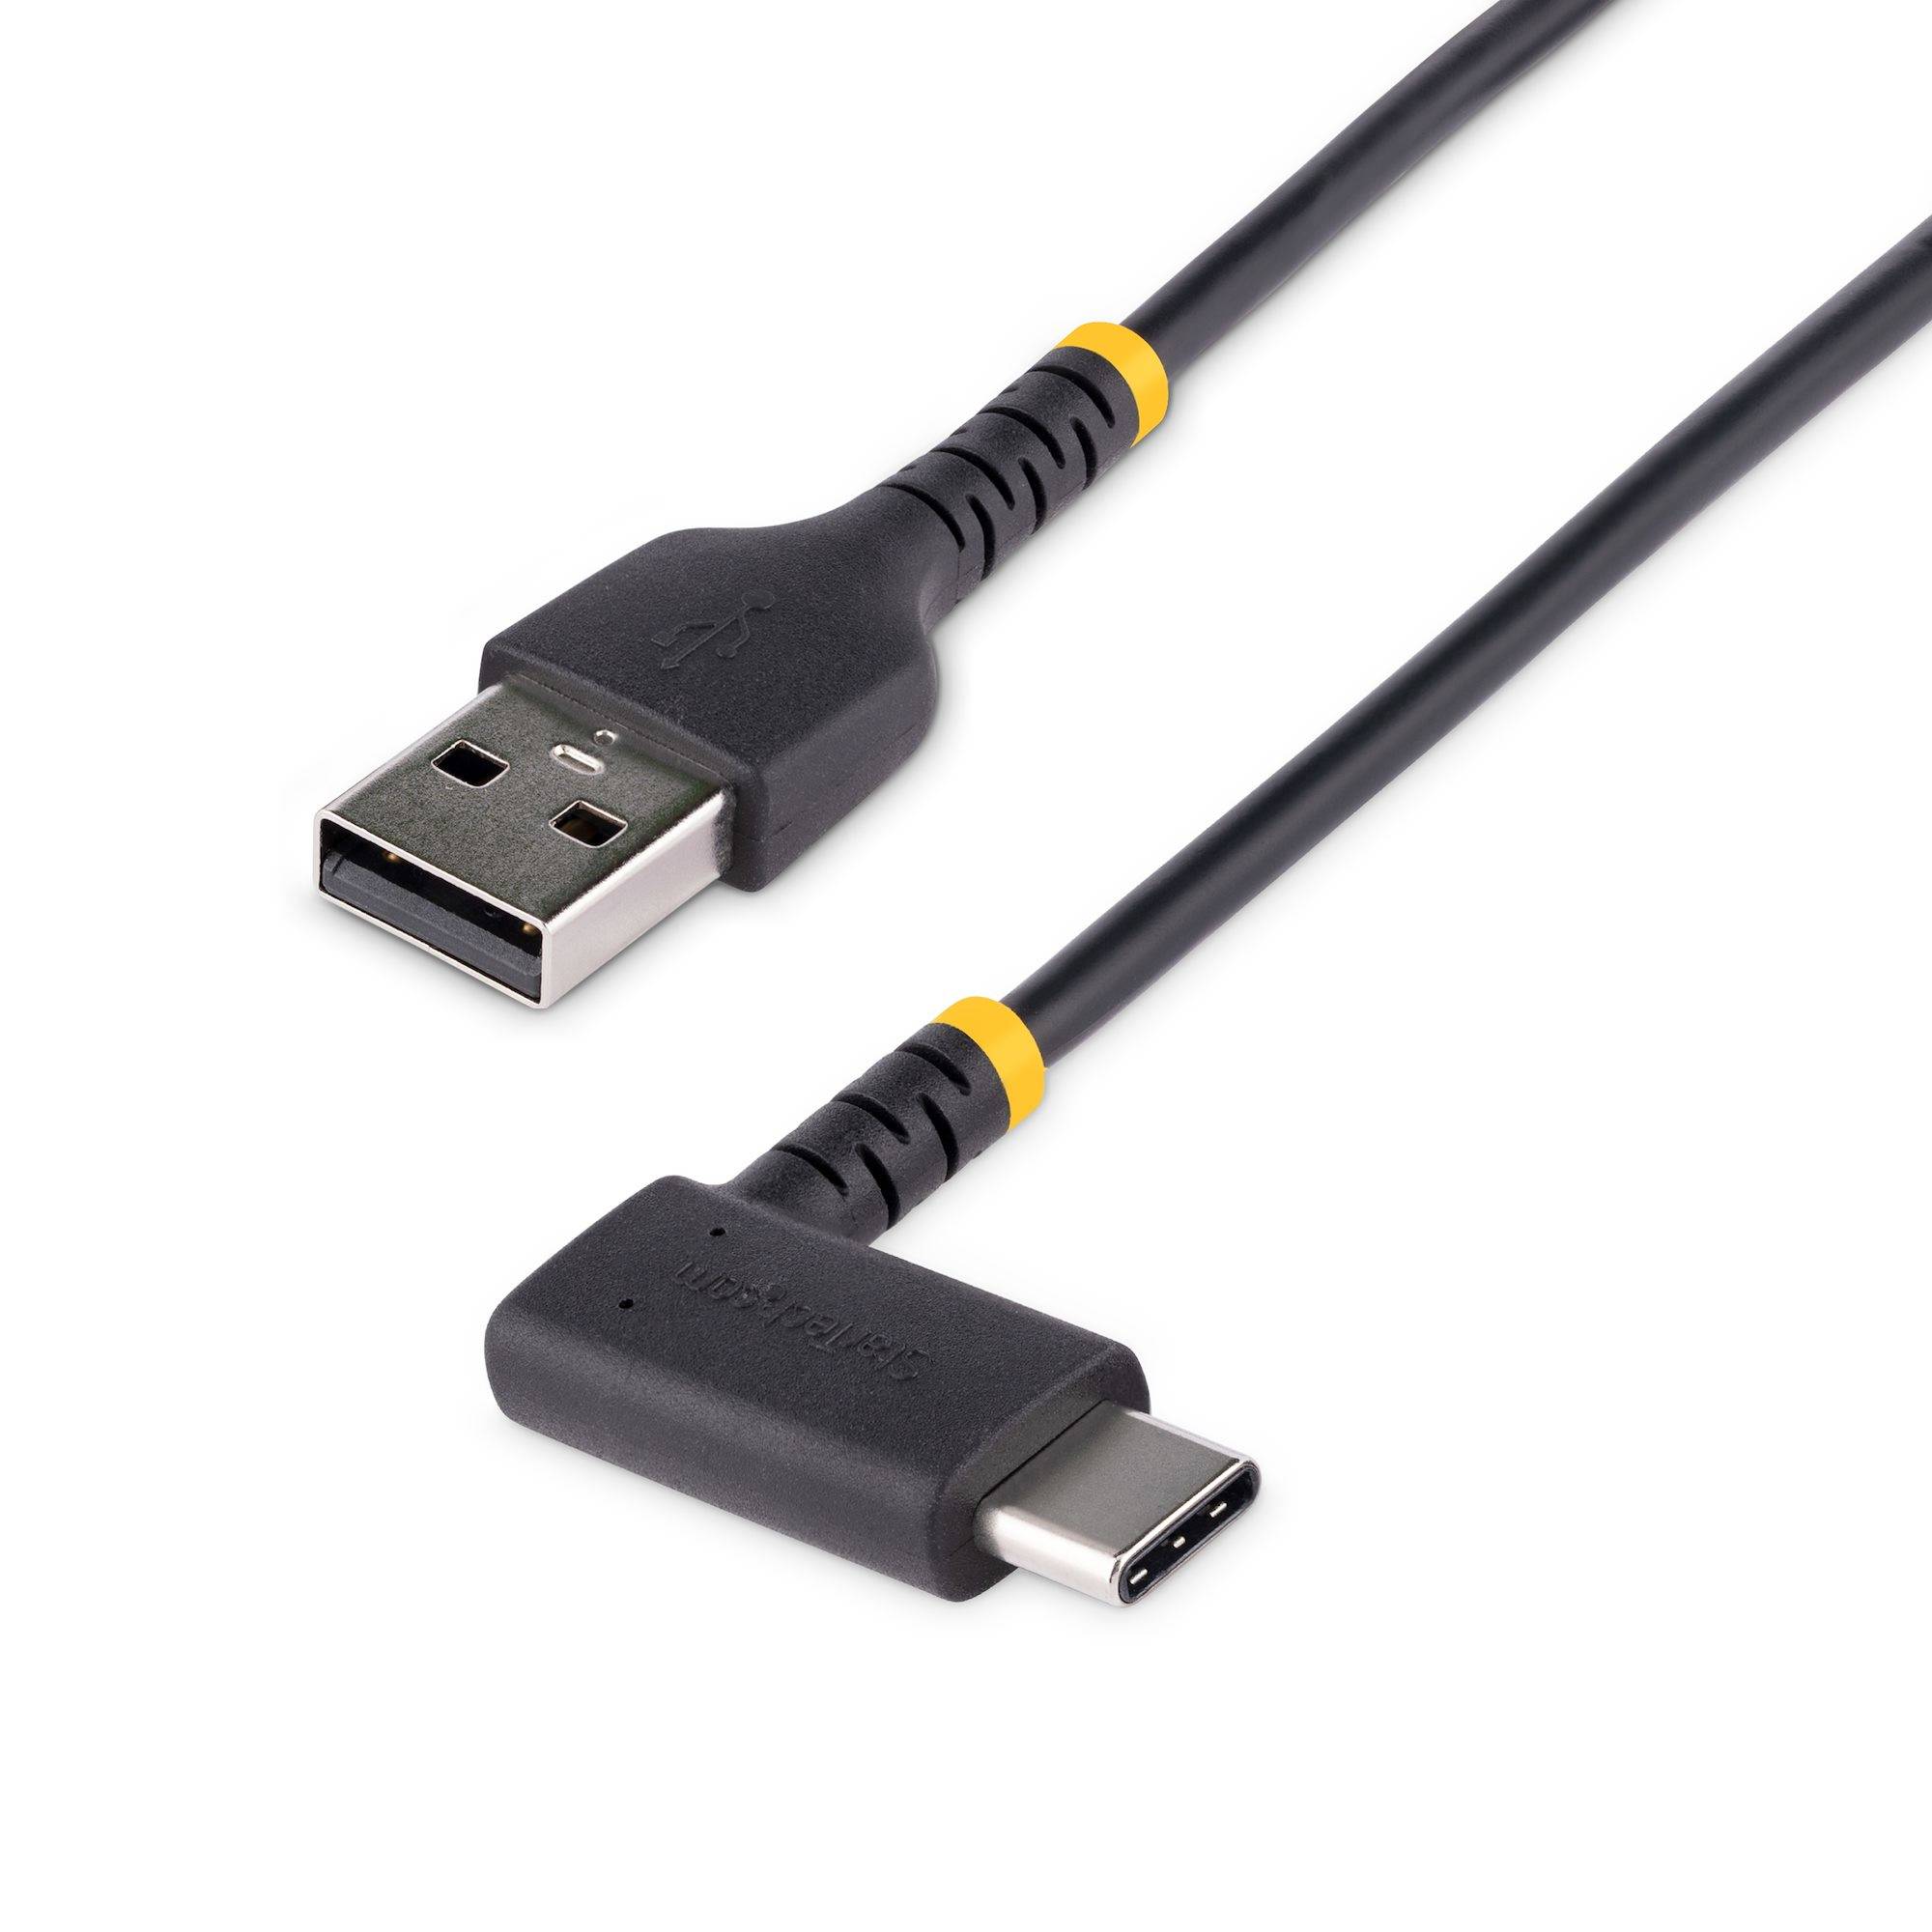 Rca Informatique - image du produit : USB-A TO USB-C CHARGING CABLE 1M RIGHT ANGLE - FAST CHARGE